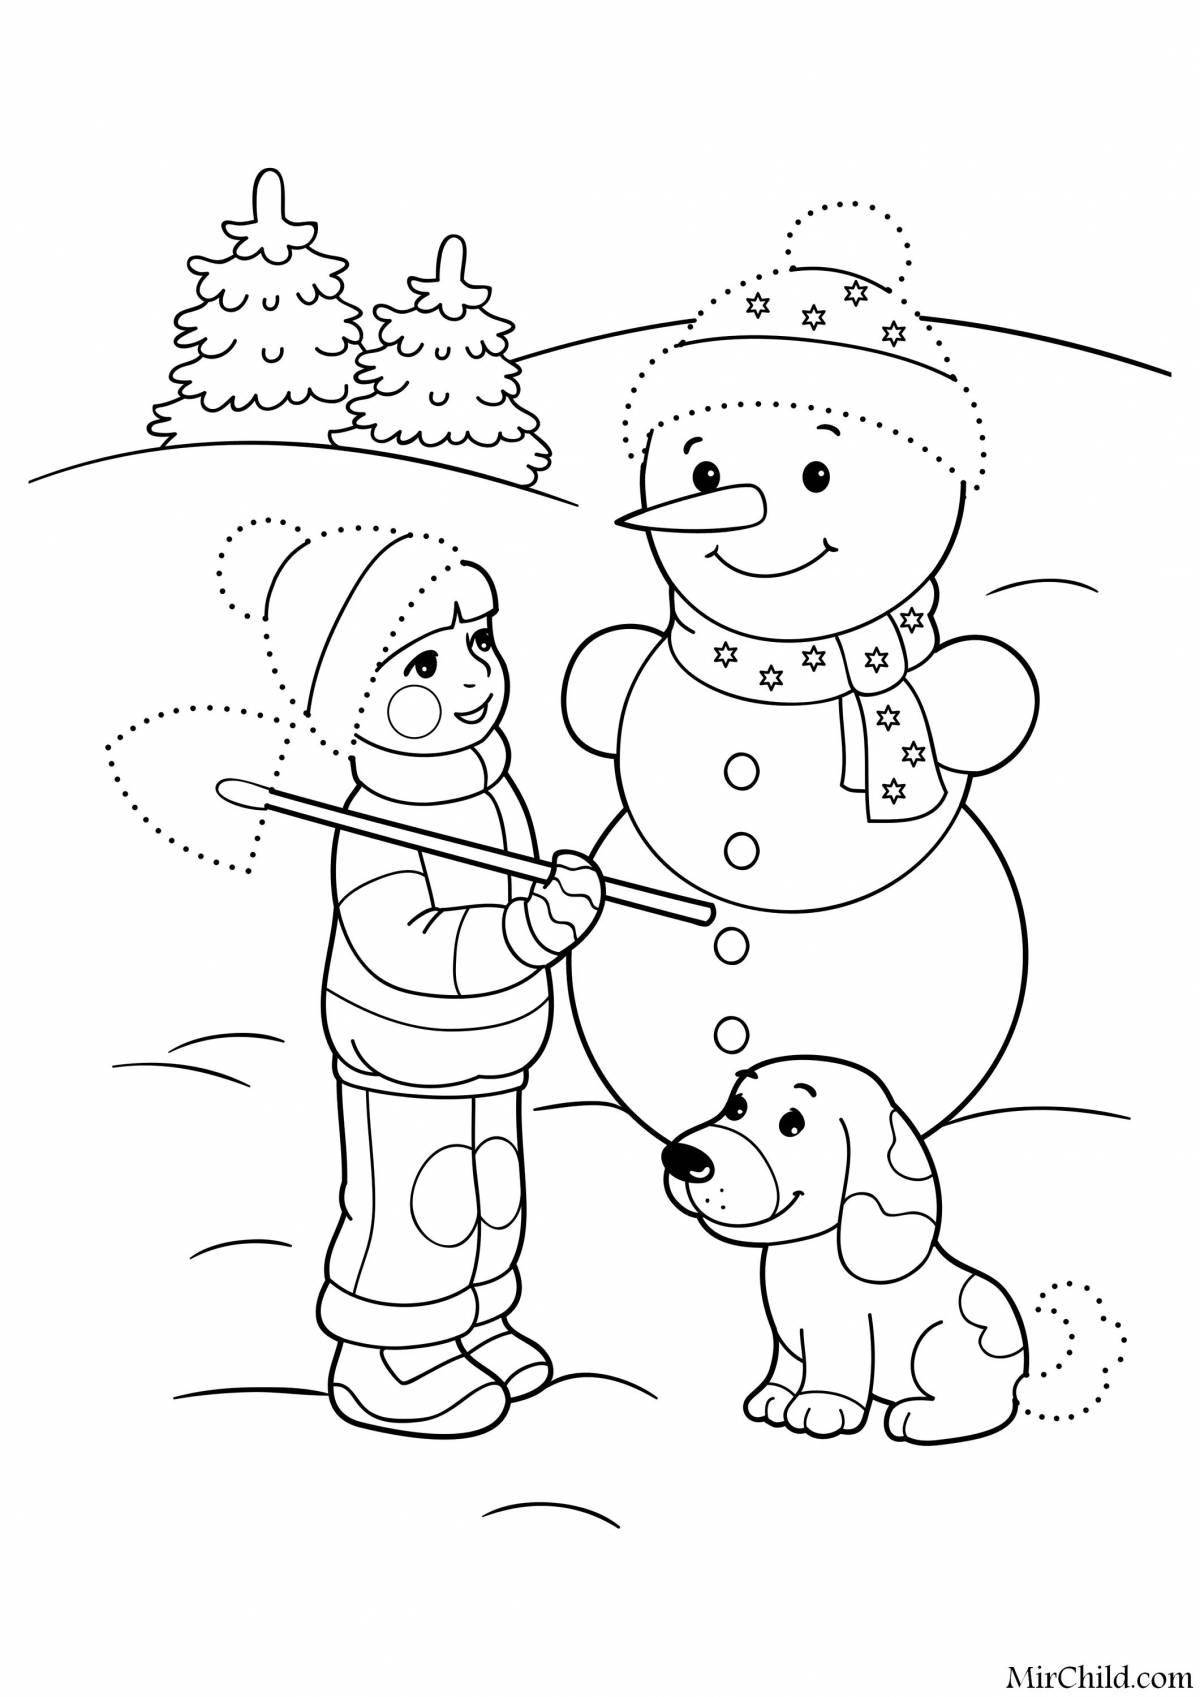 Delightful coloring book for children 3 years old winter